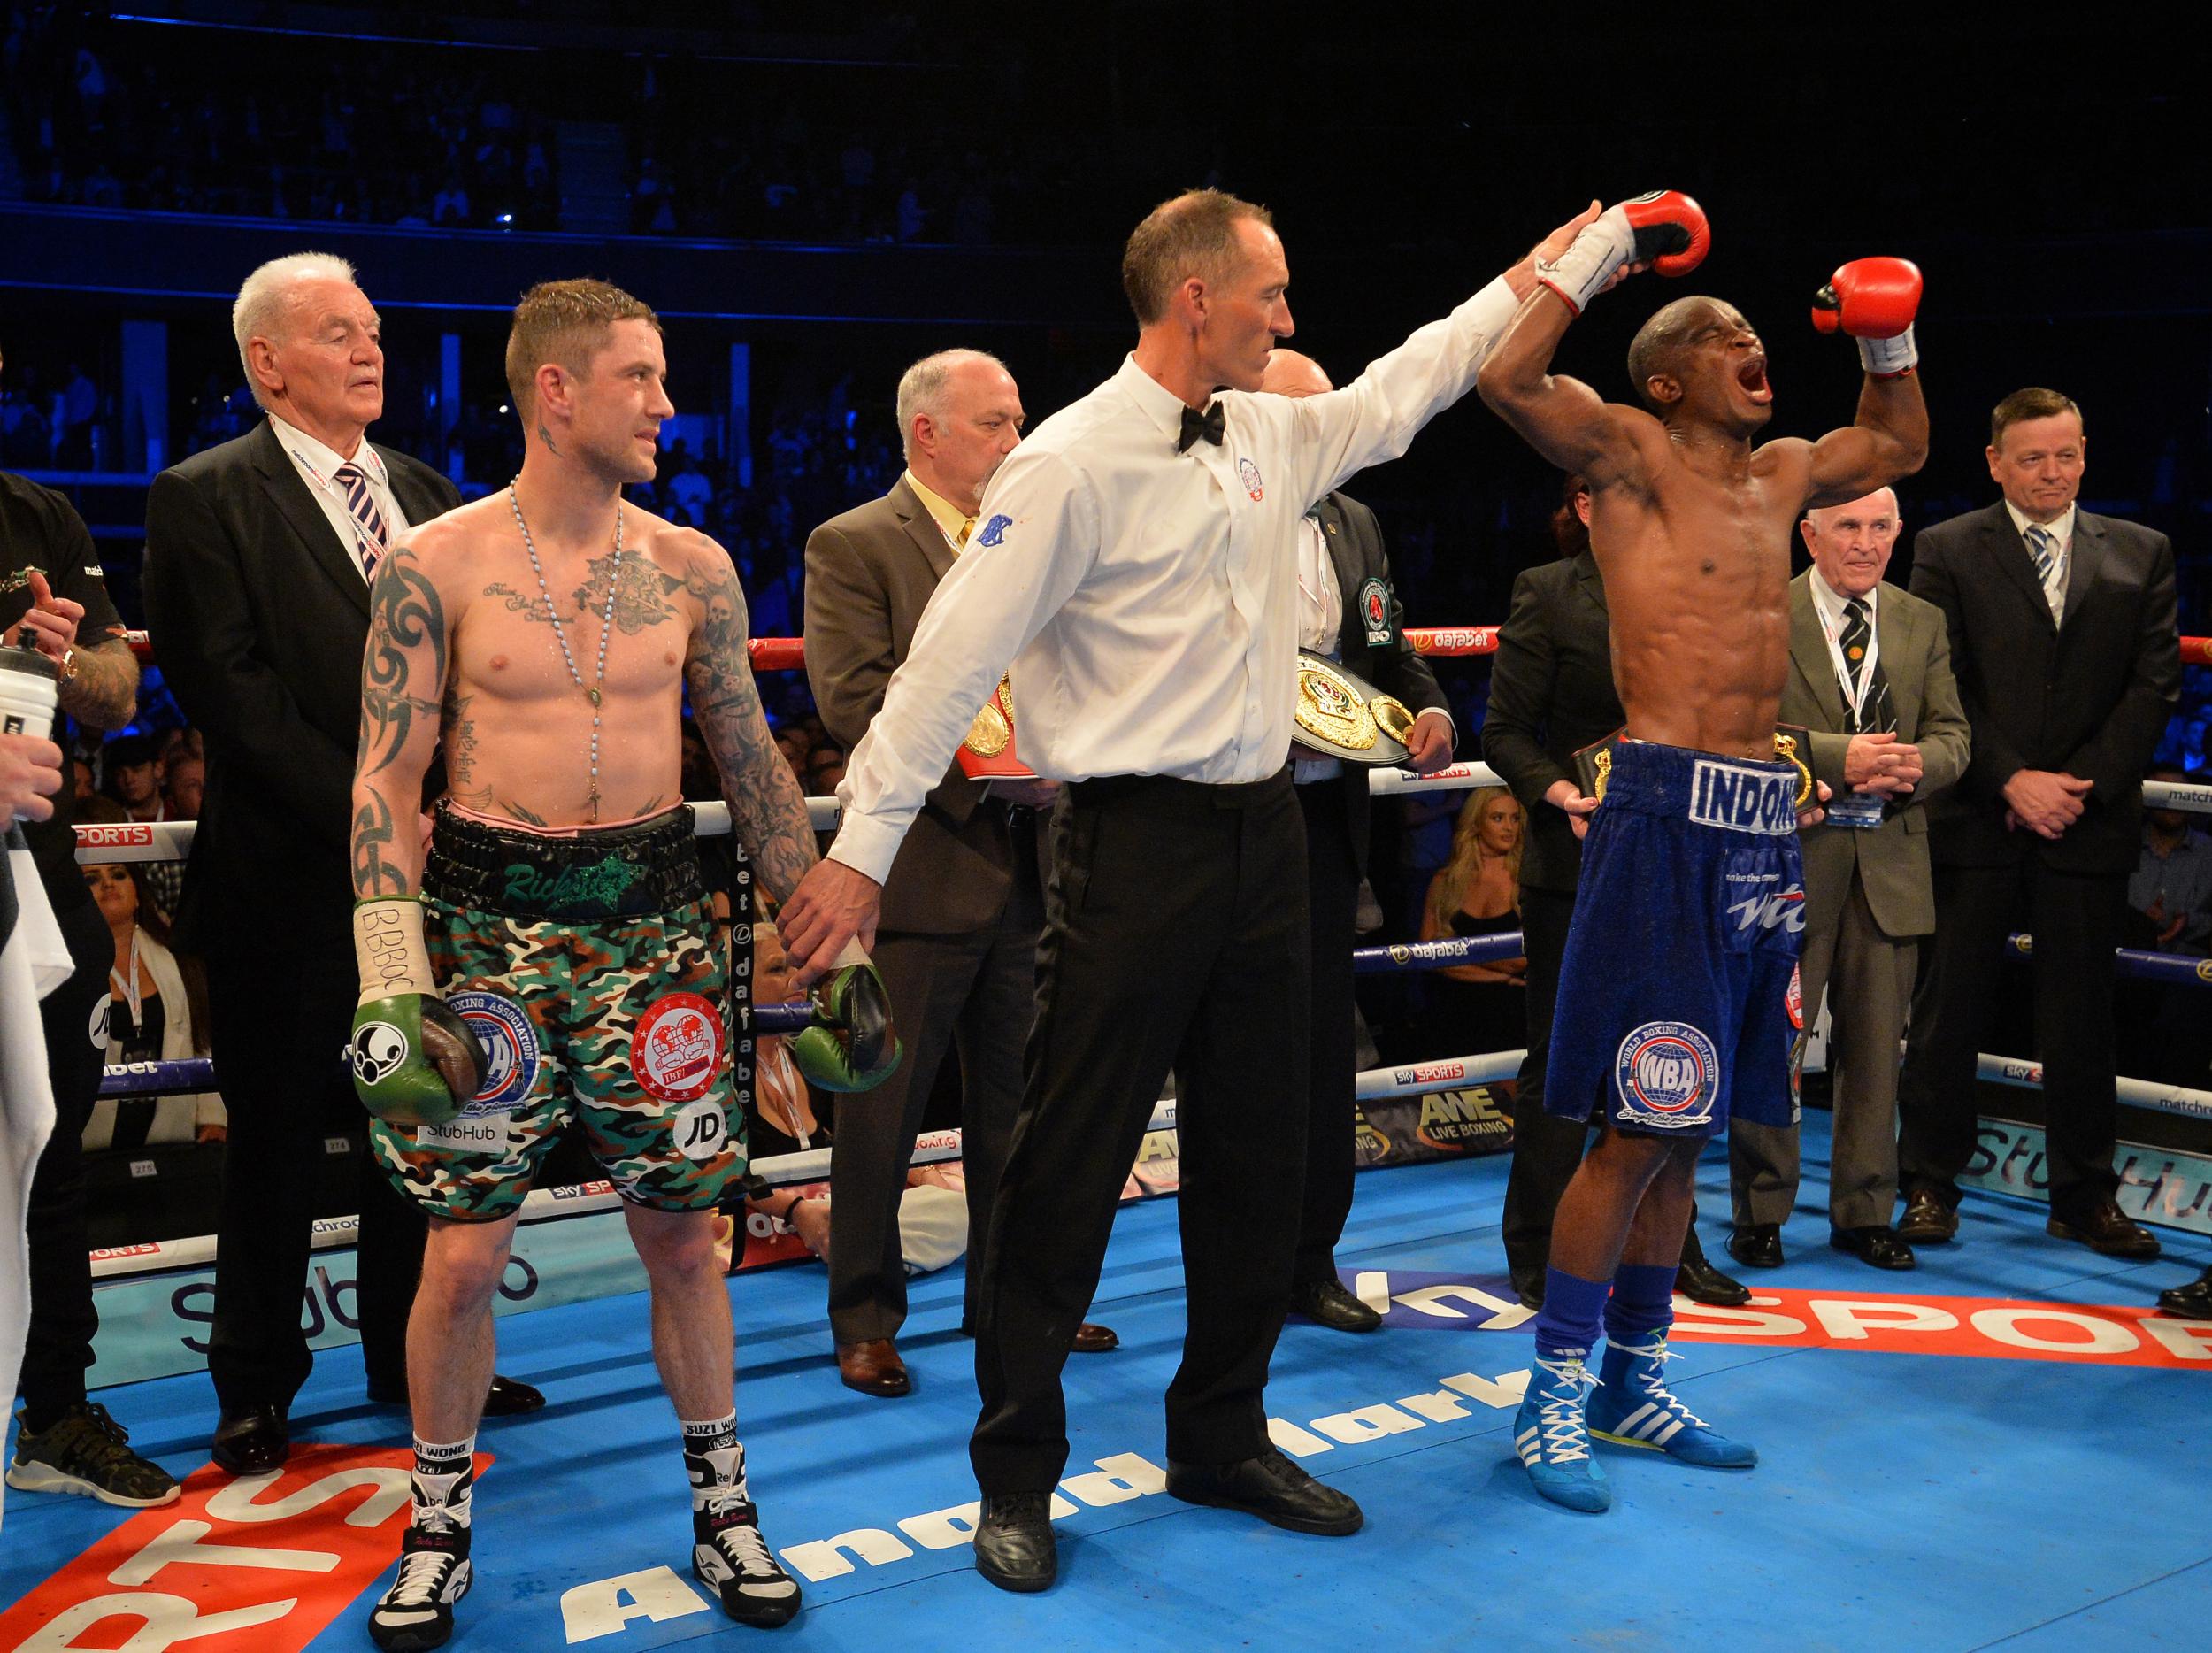 Burns lost his WBA light-welterweight title to Indongo